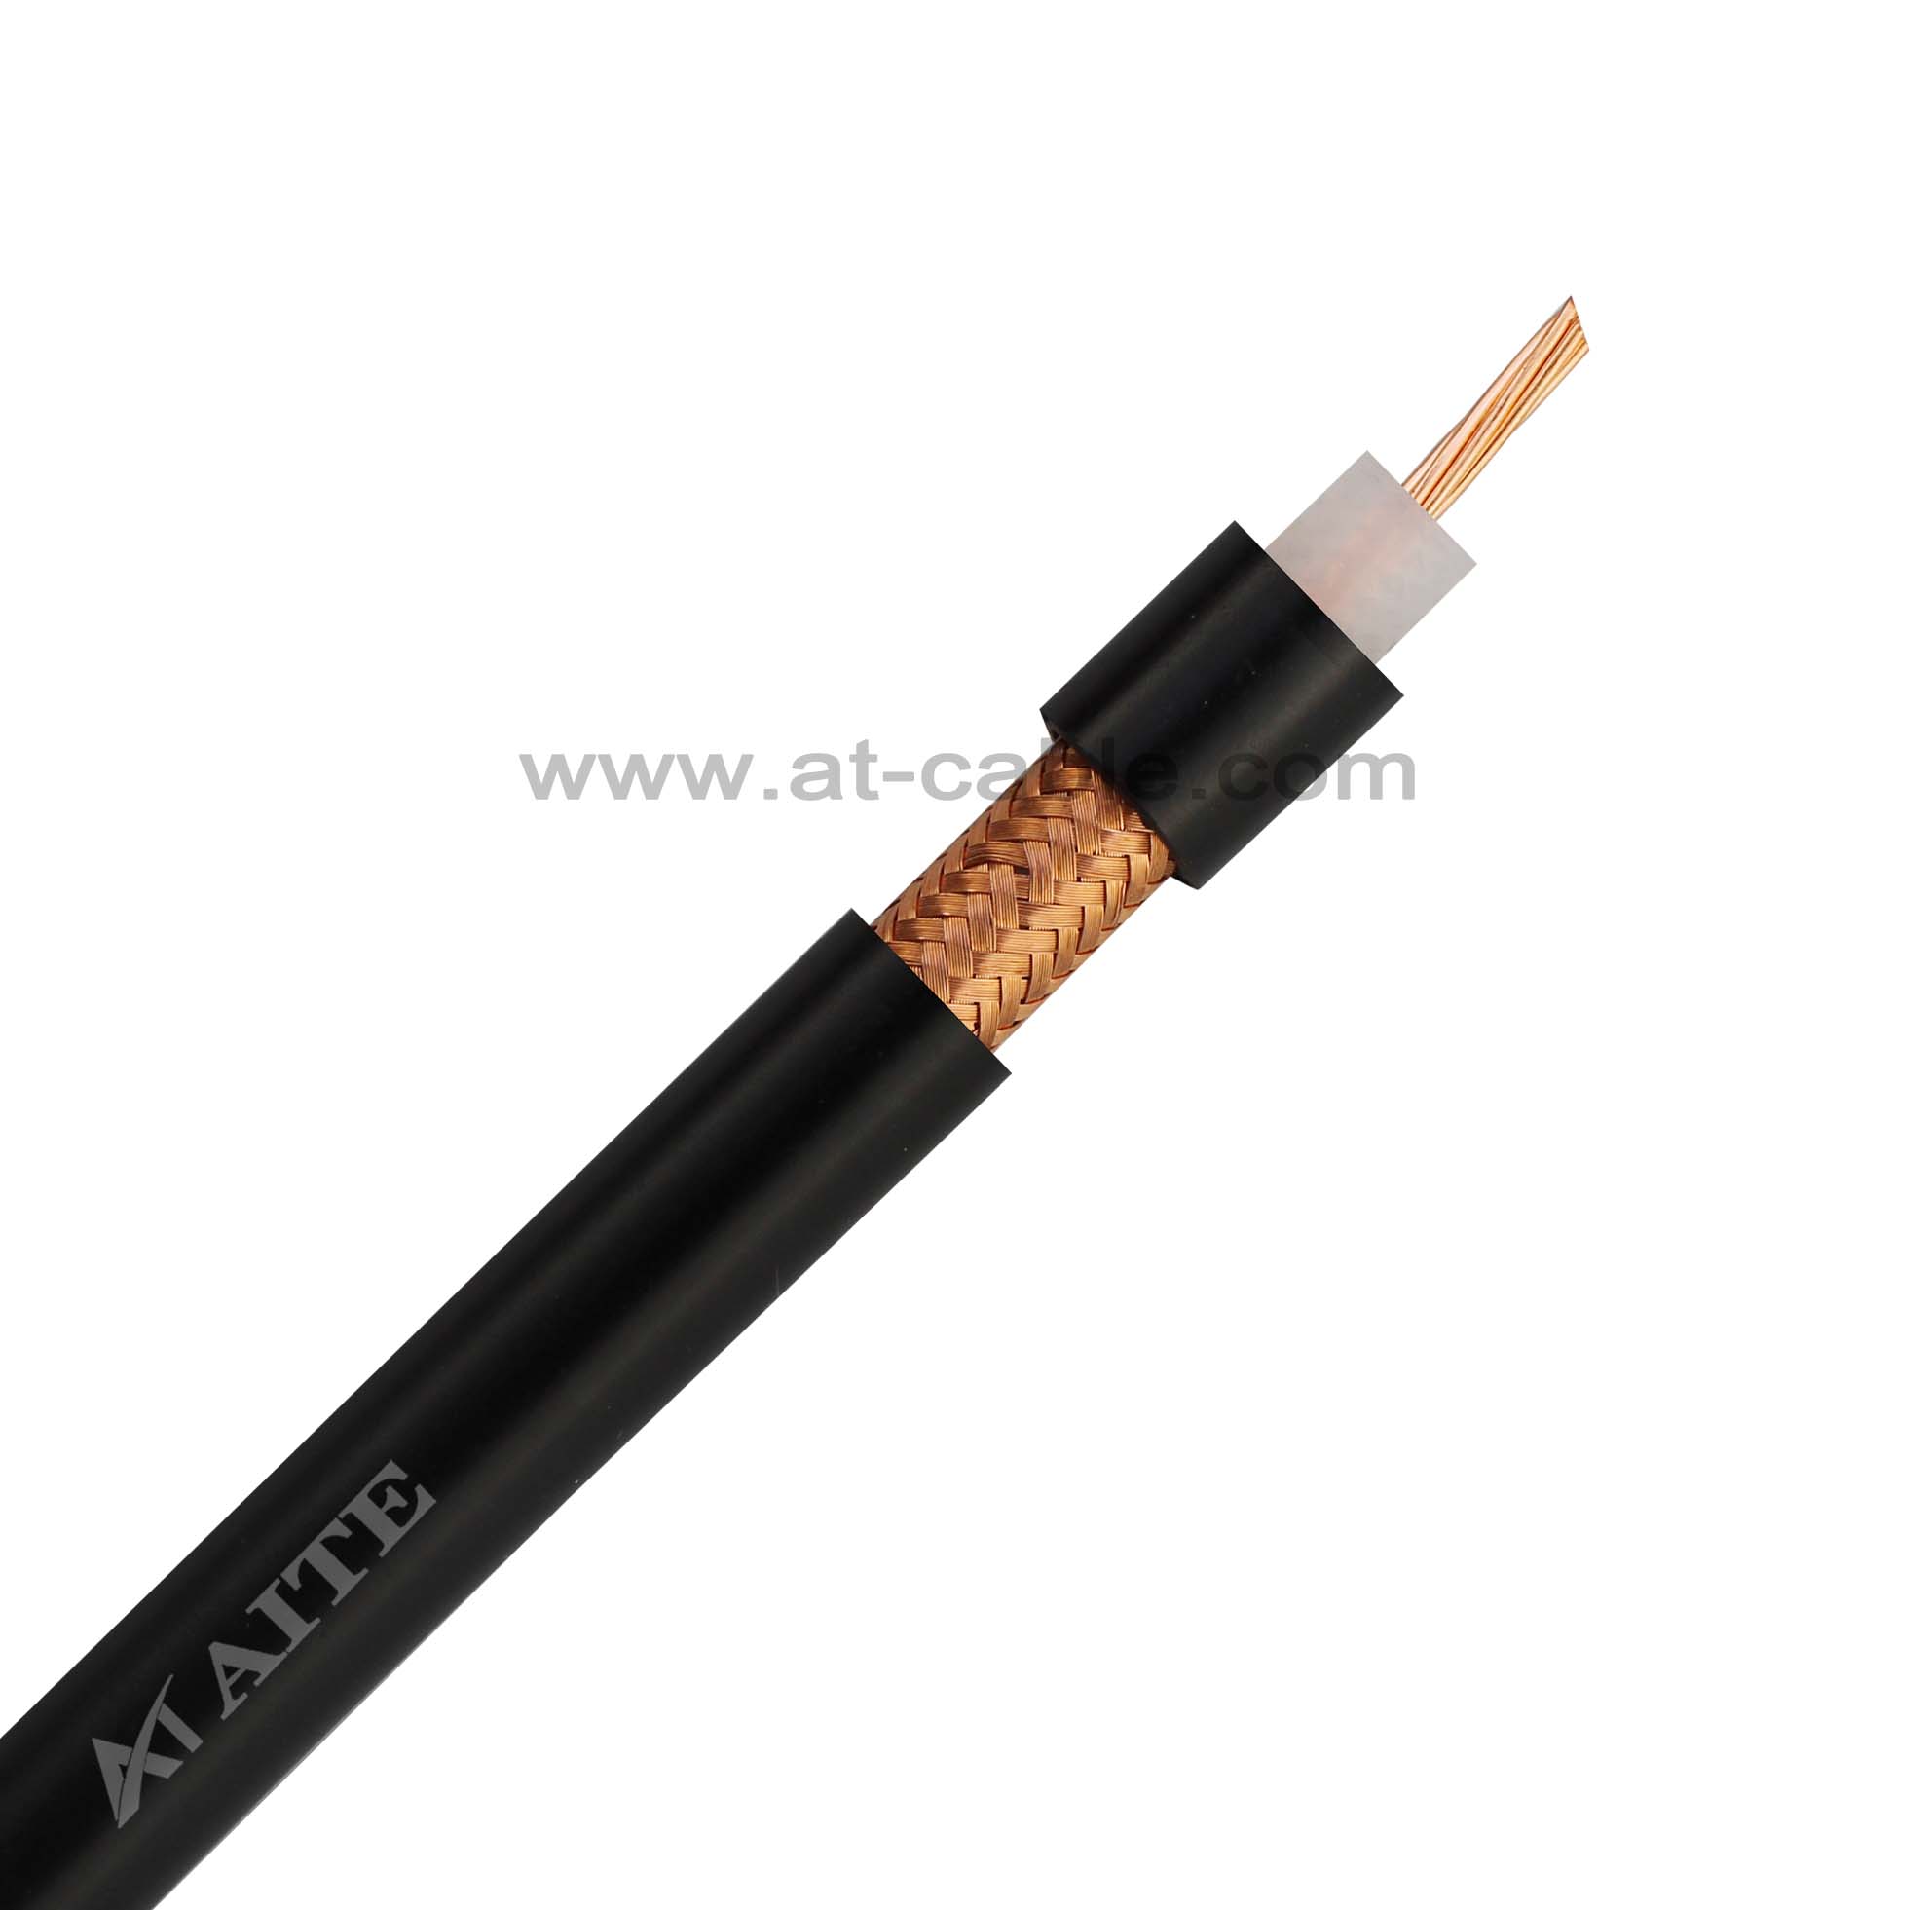 RG213 Coaxial Cable